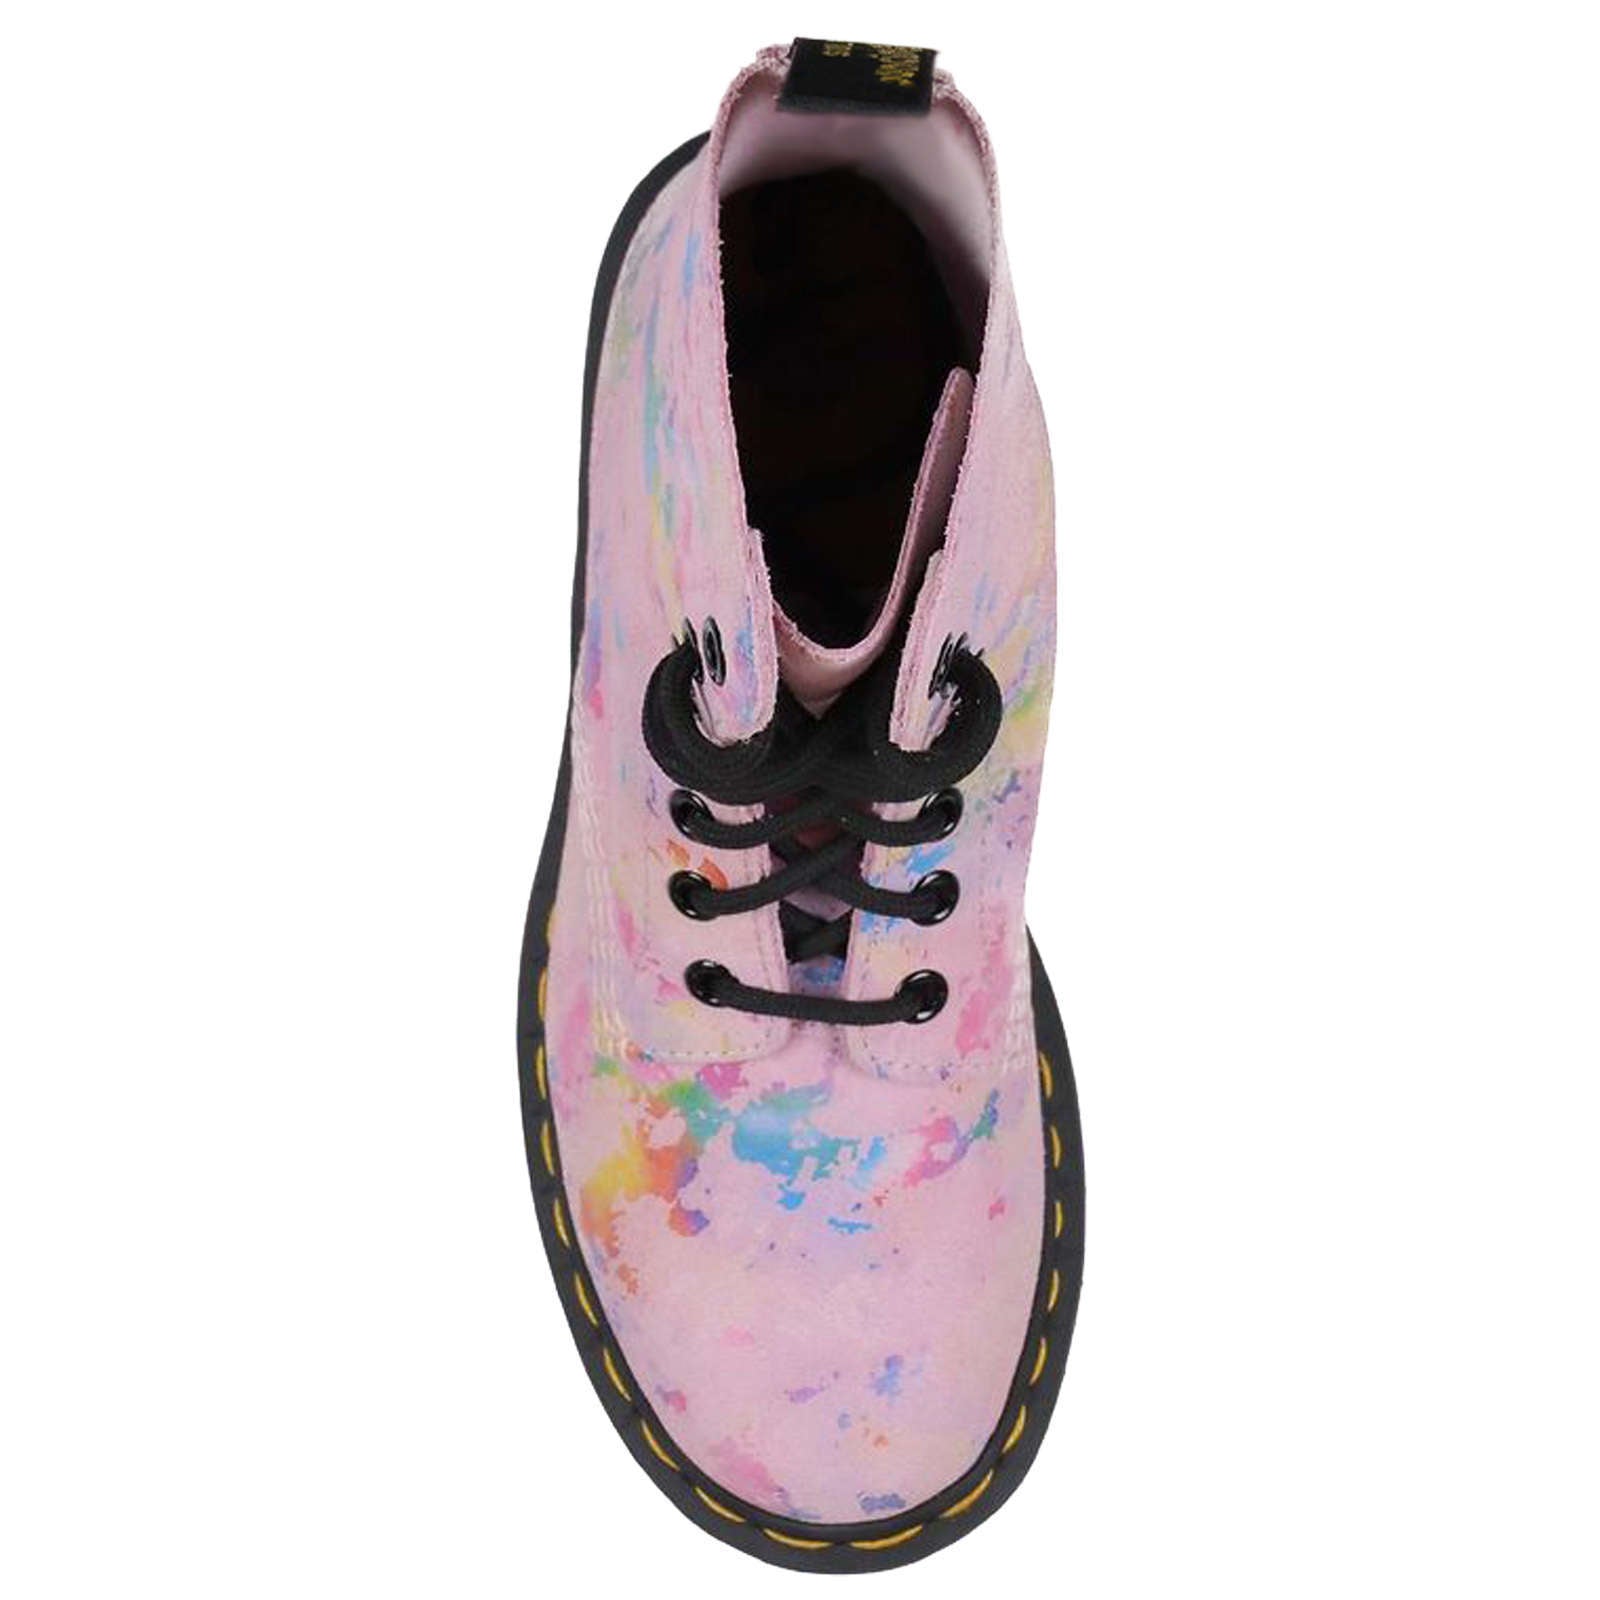 Dr. Martens 1460 Pascal Suede Leather Women's Ankle Boots#color_pink